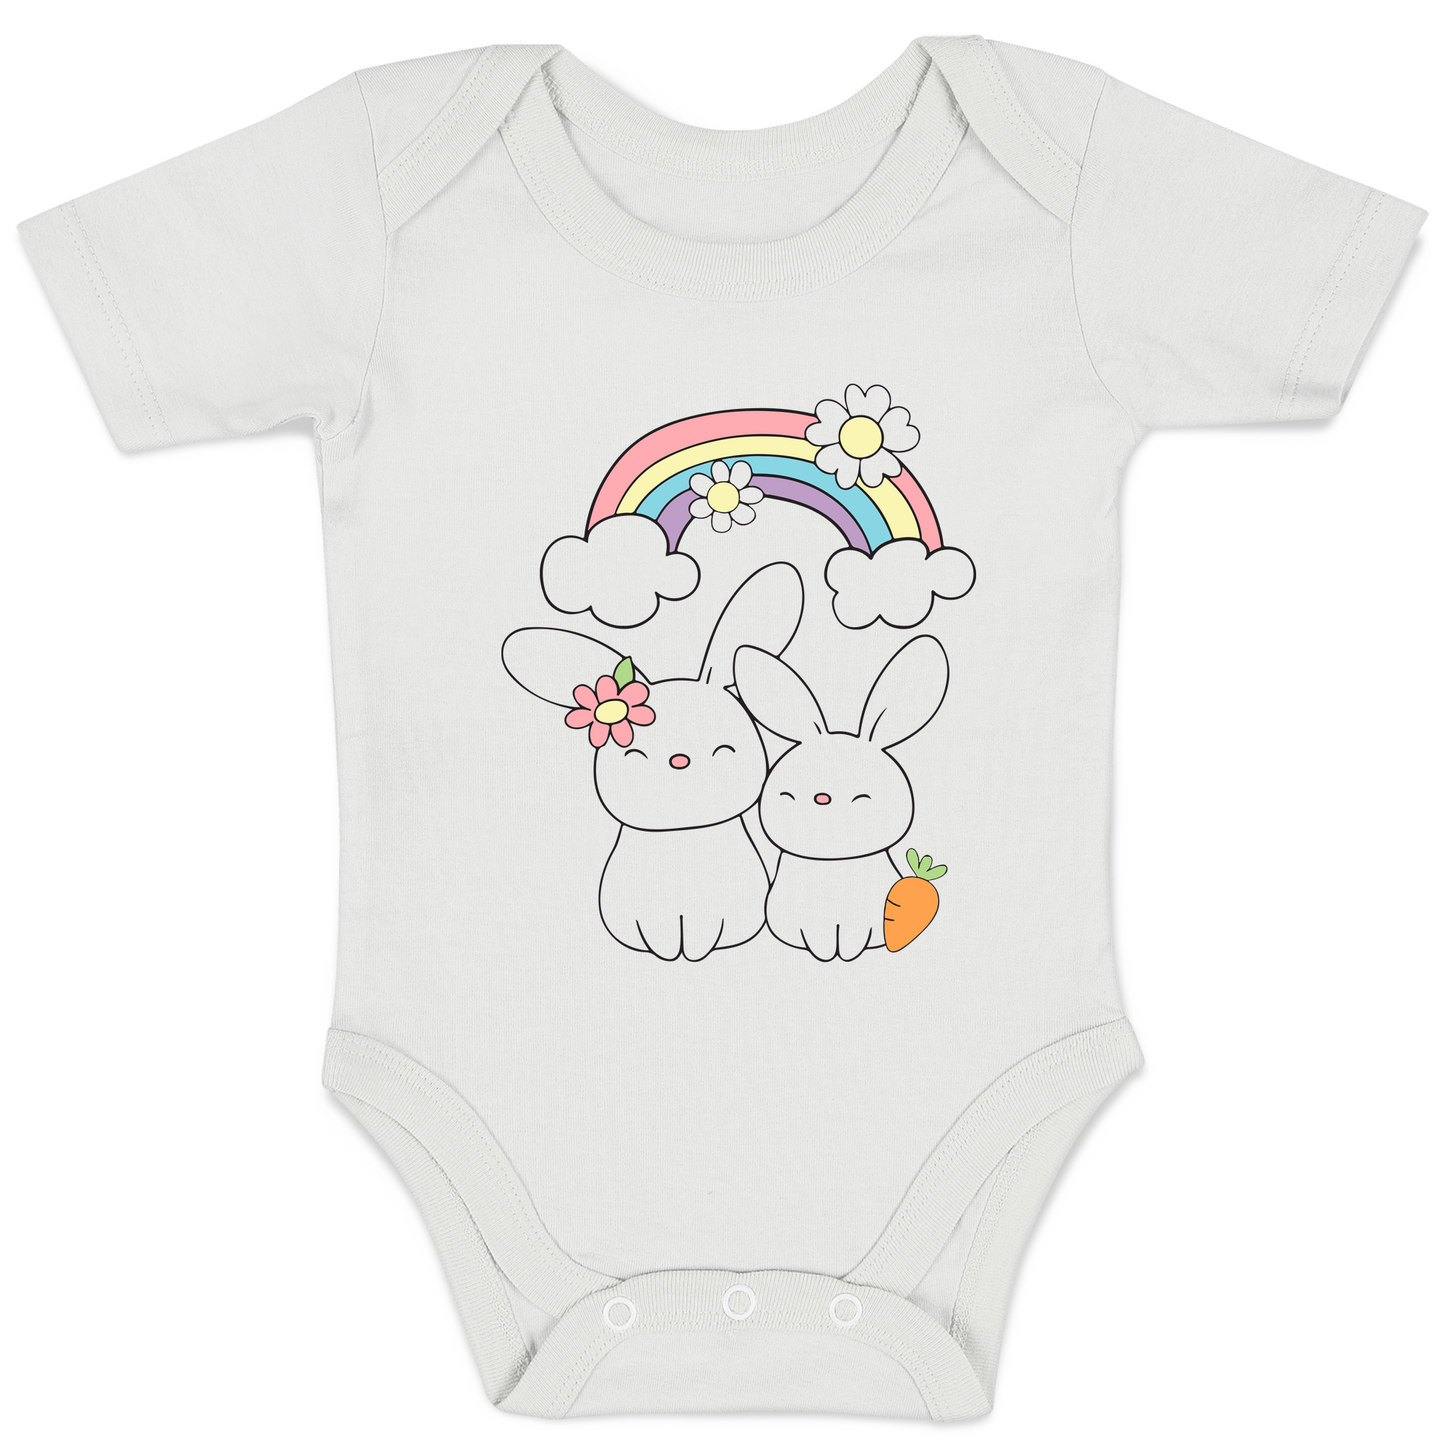 Endanzoo Matching Mom & Baby Organic Outfits - Bunny Love (White)